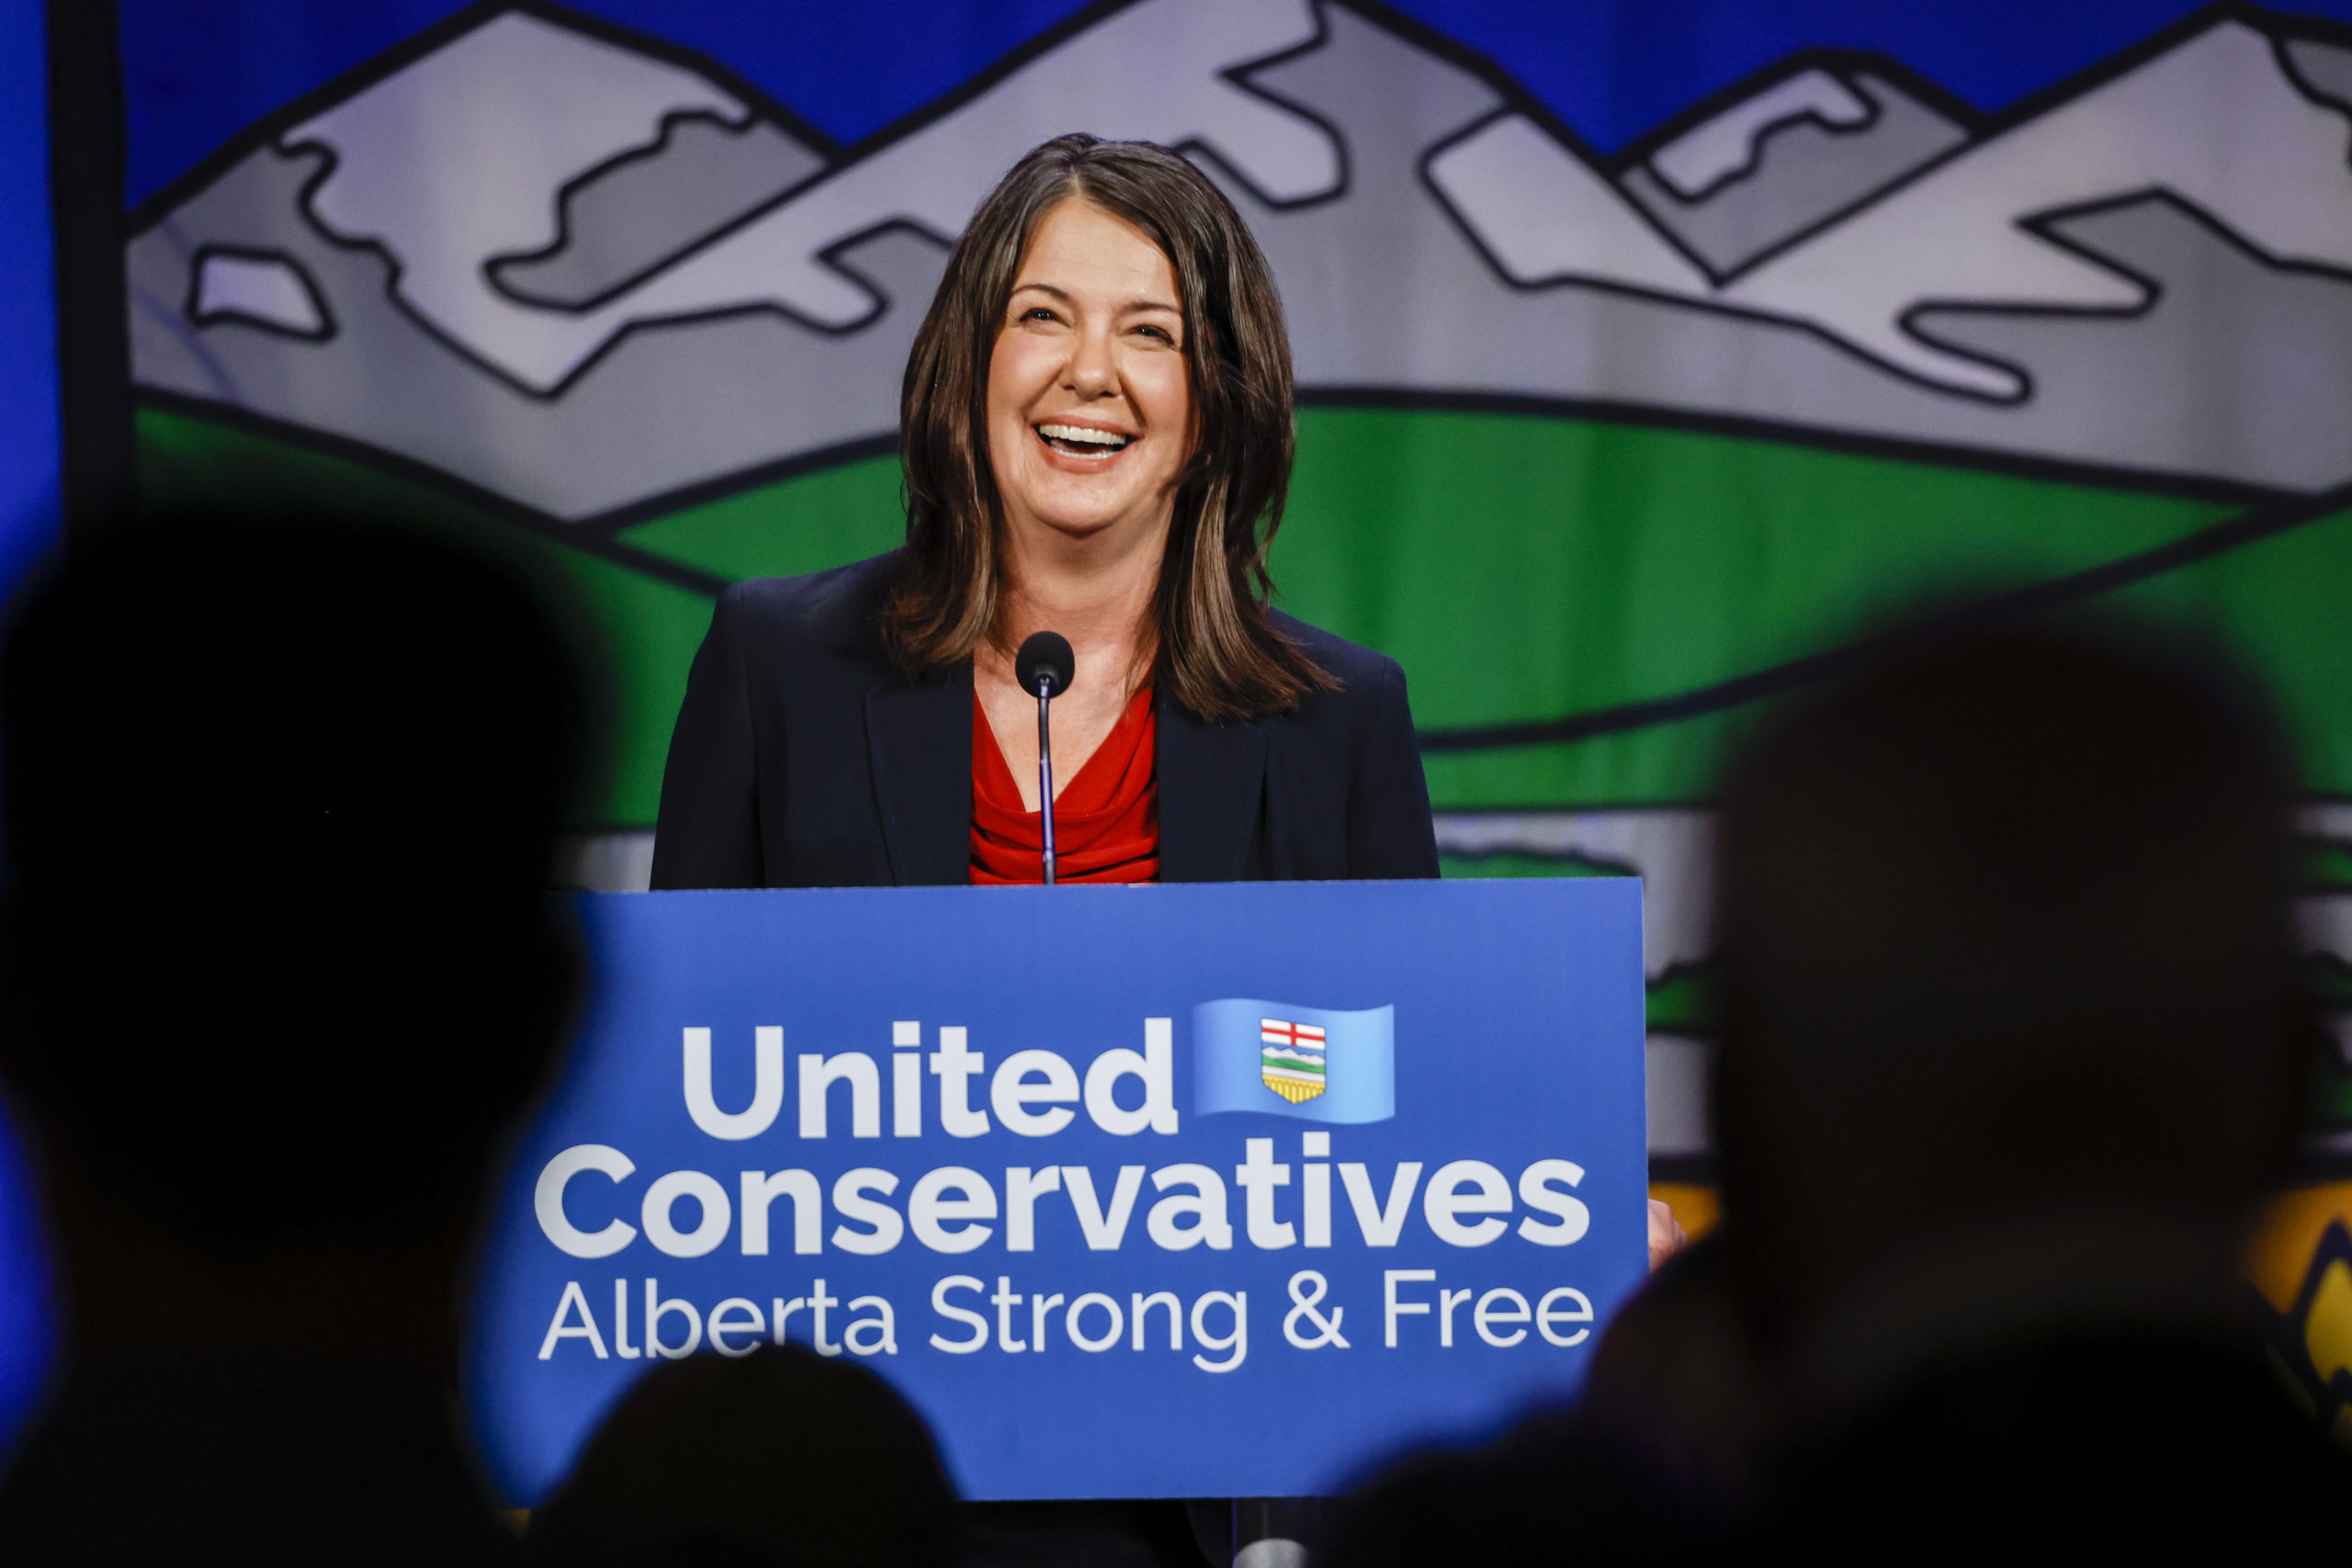 Danielle Smith celebrates after being chosen as the new leader of the United Conservative Party